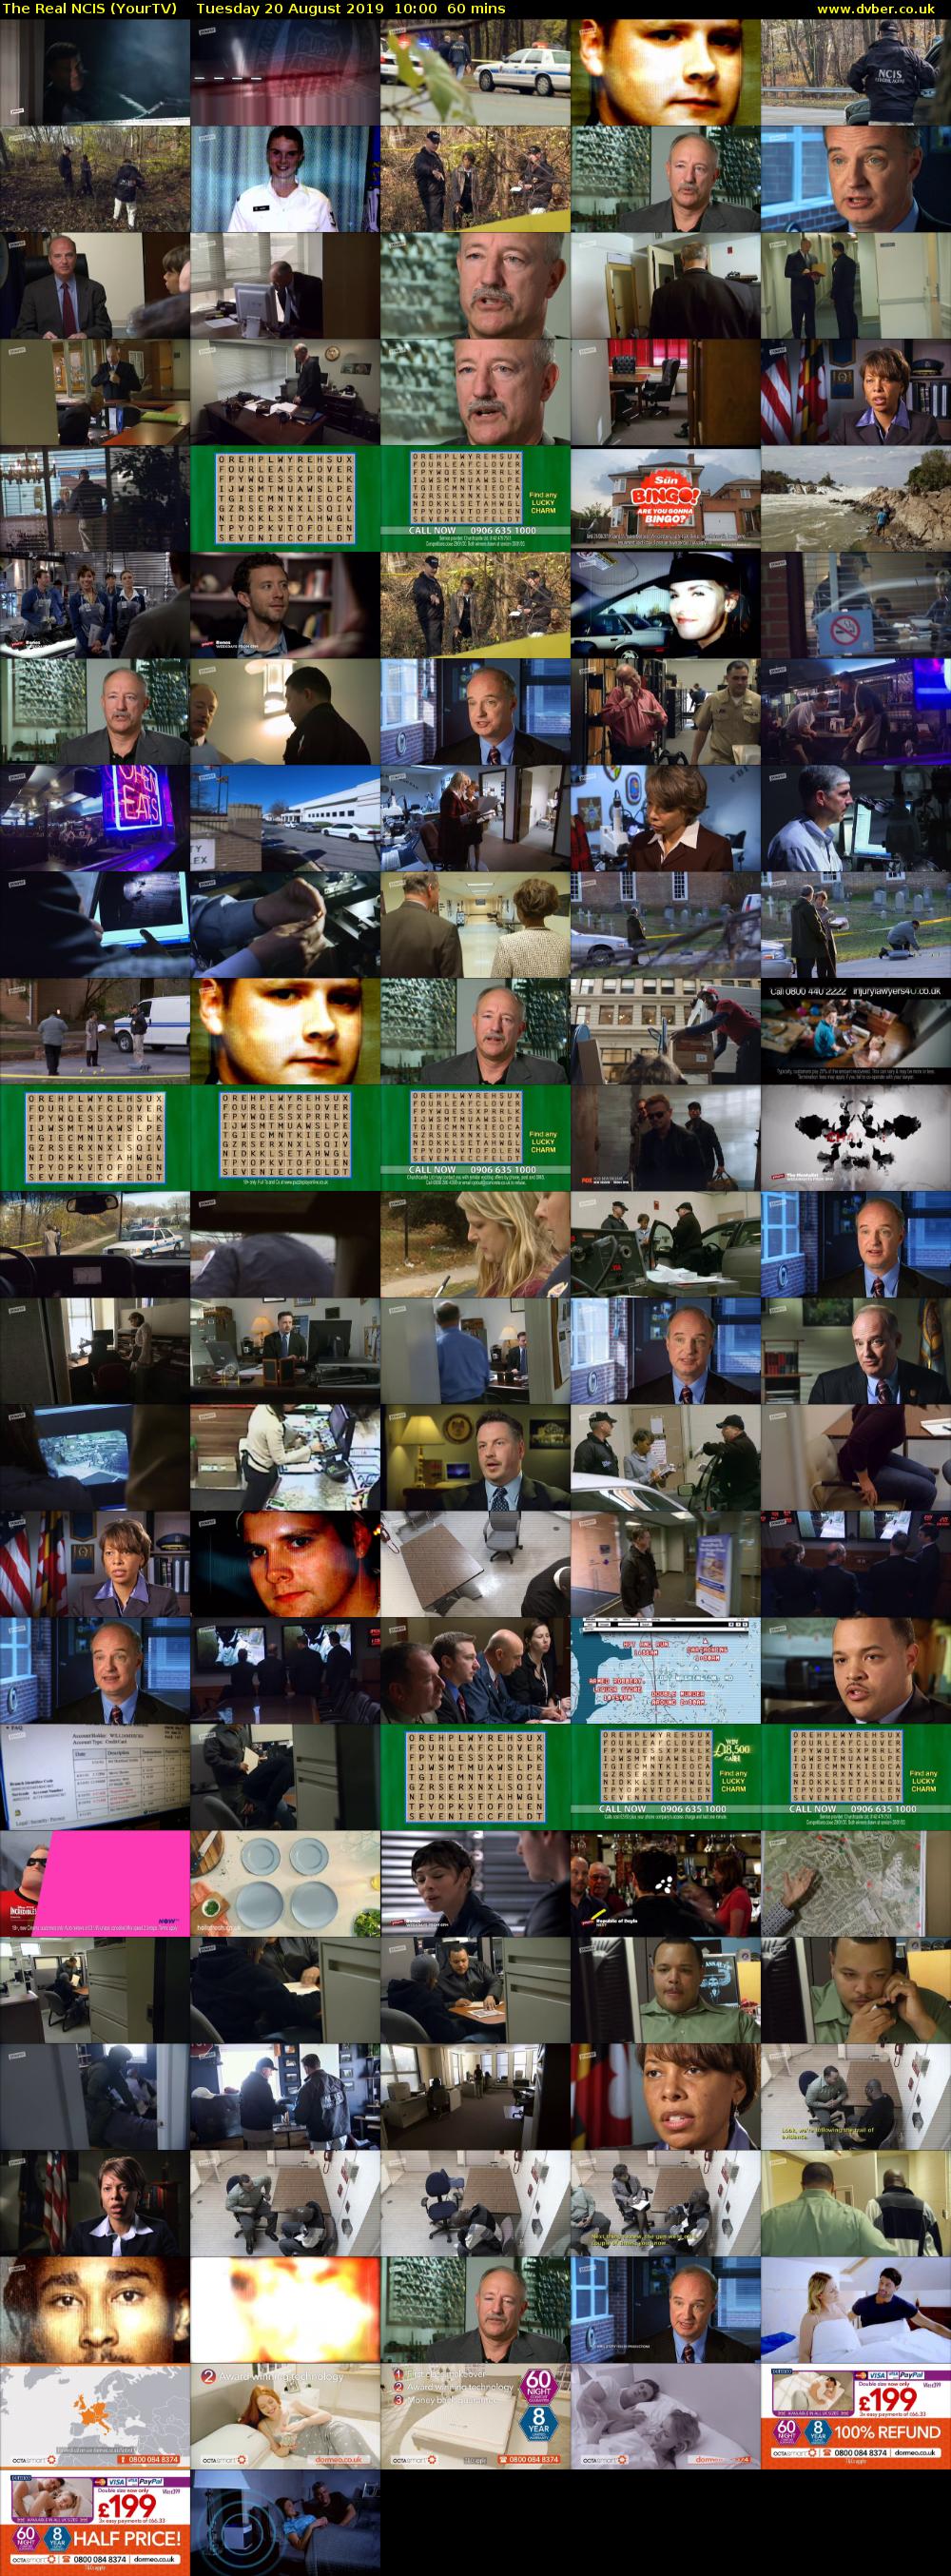 The Real NCIS (YourTV) Tuesday 20 August 2019 10:00 - 11:00